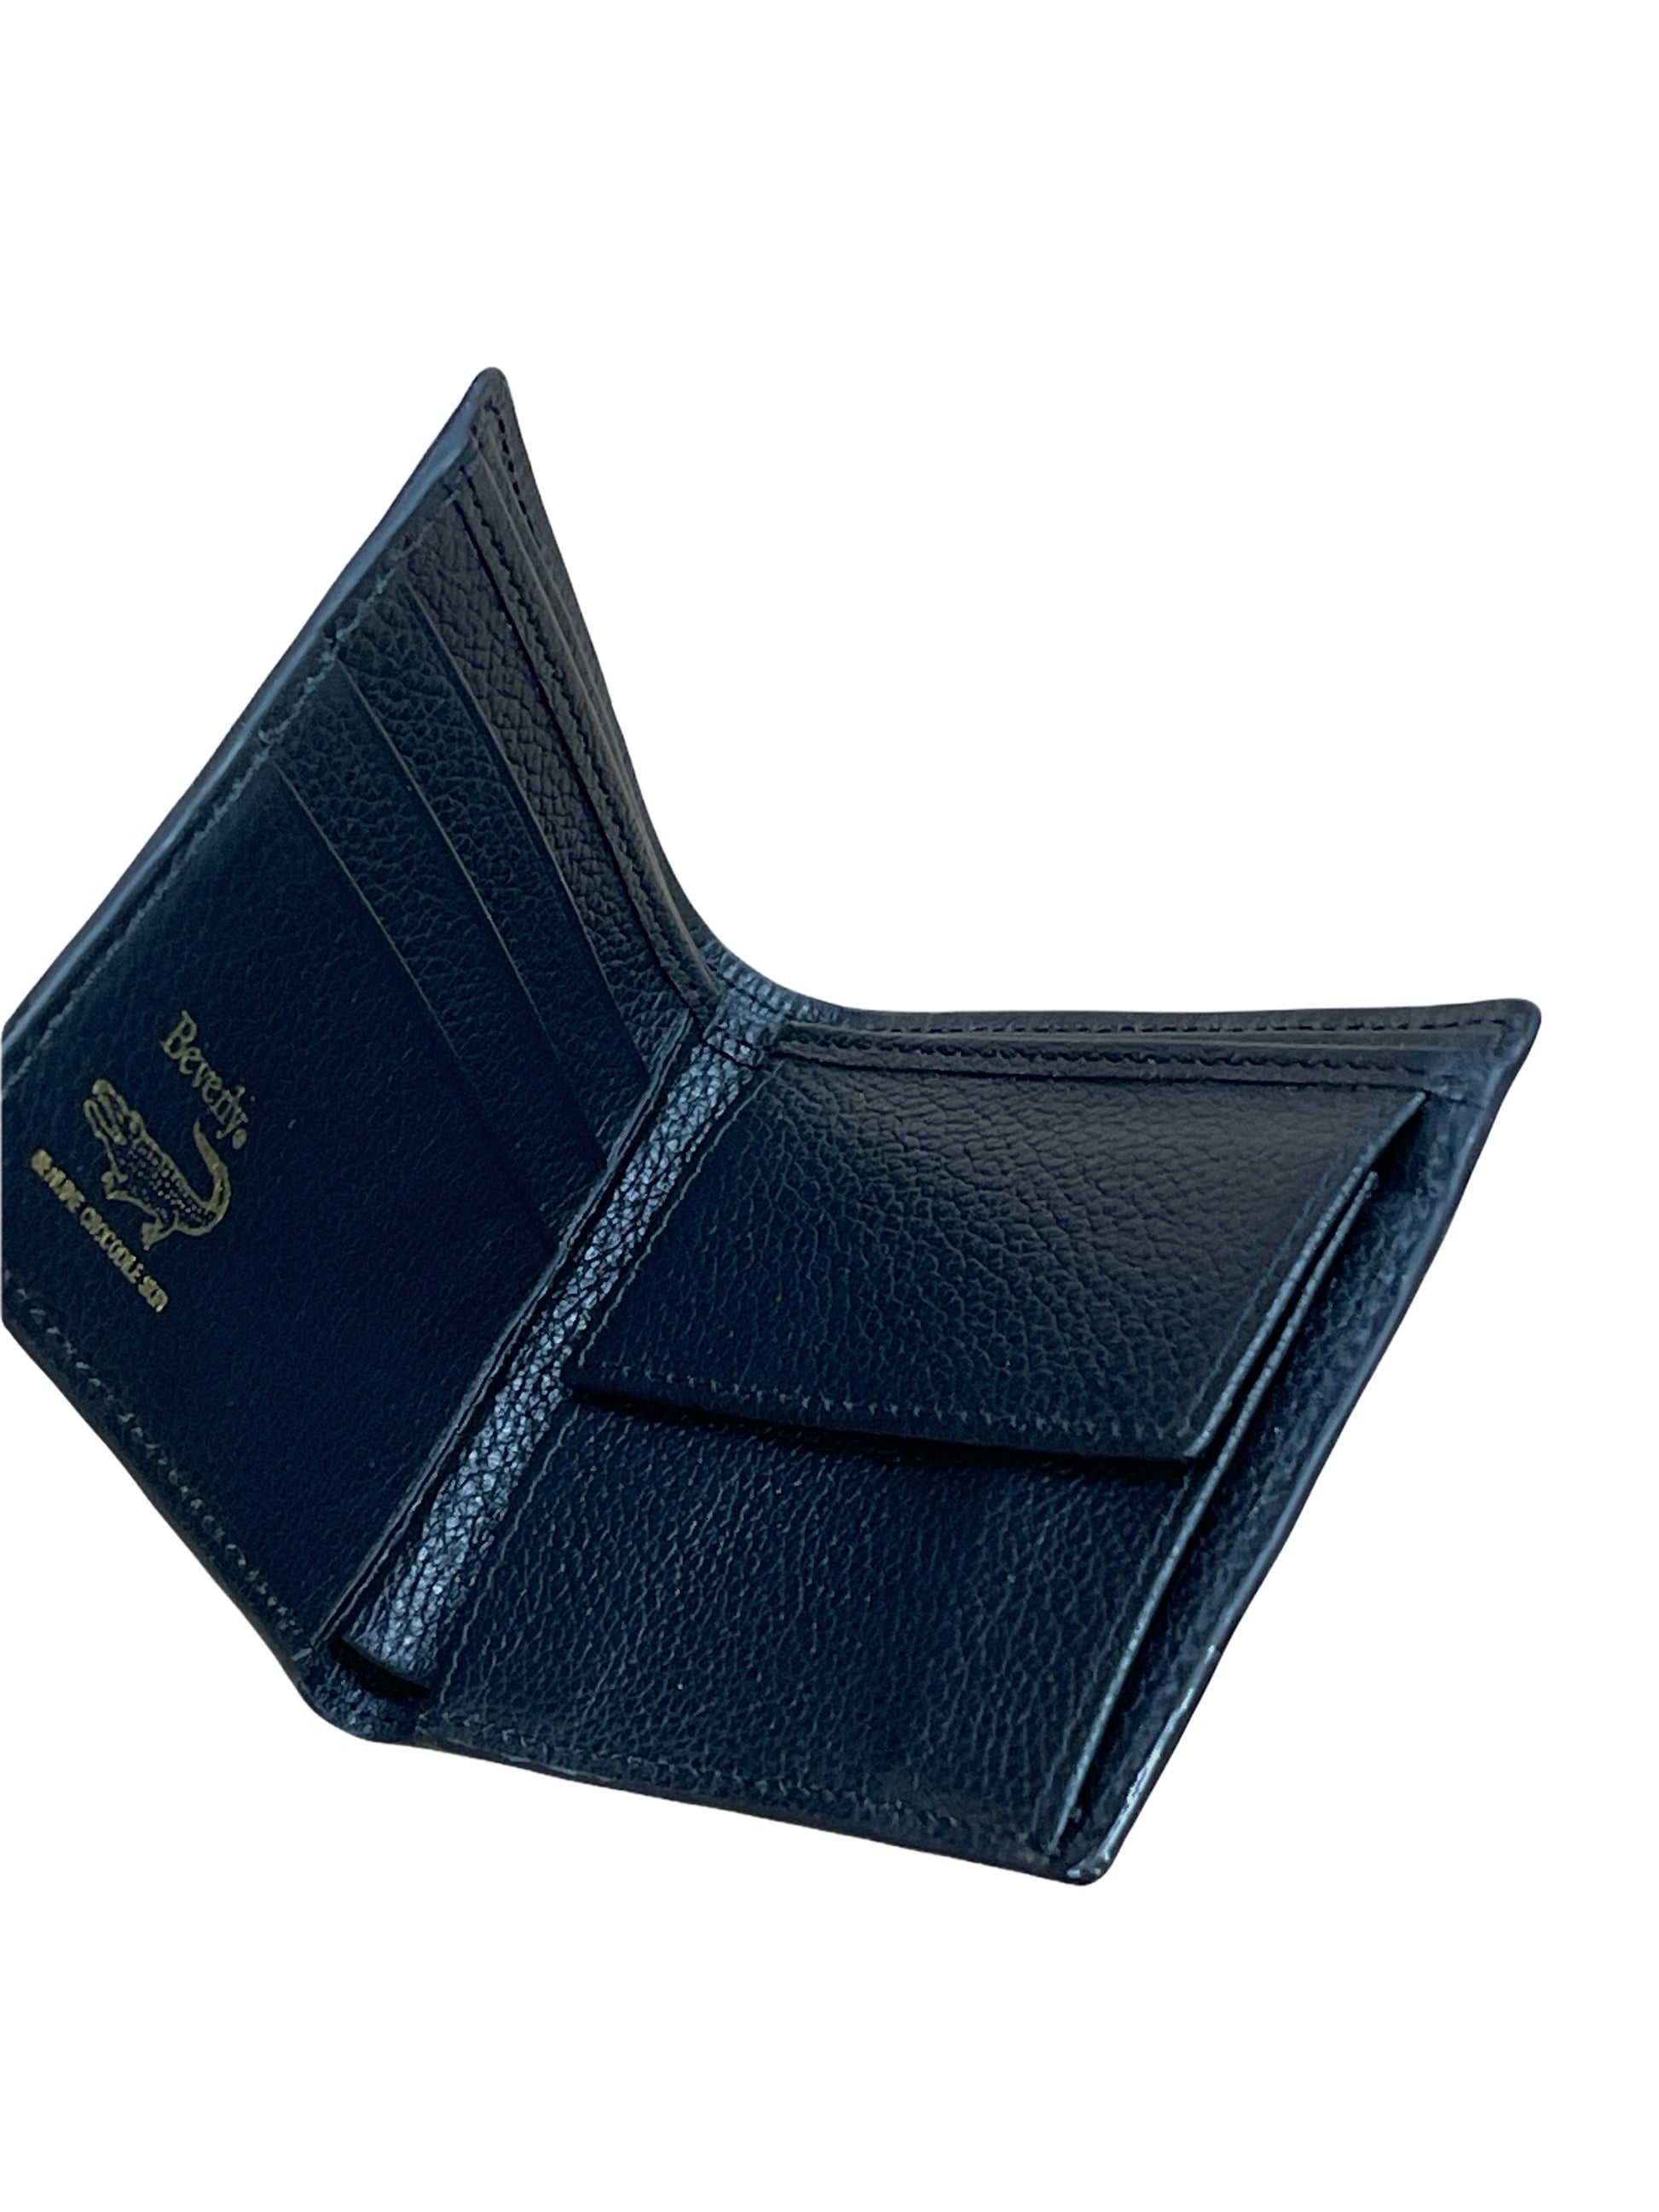 Beverly Black Genuine Crocodile Skin Leather Bi-Fold Wallet - Genuine Design luxury consignment Calgary, Alberta, Canada New and pre-owned clothing, shoes, accessories.